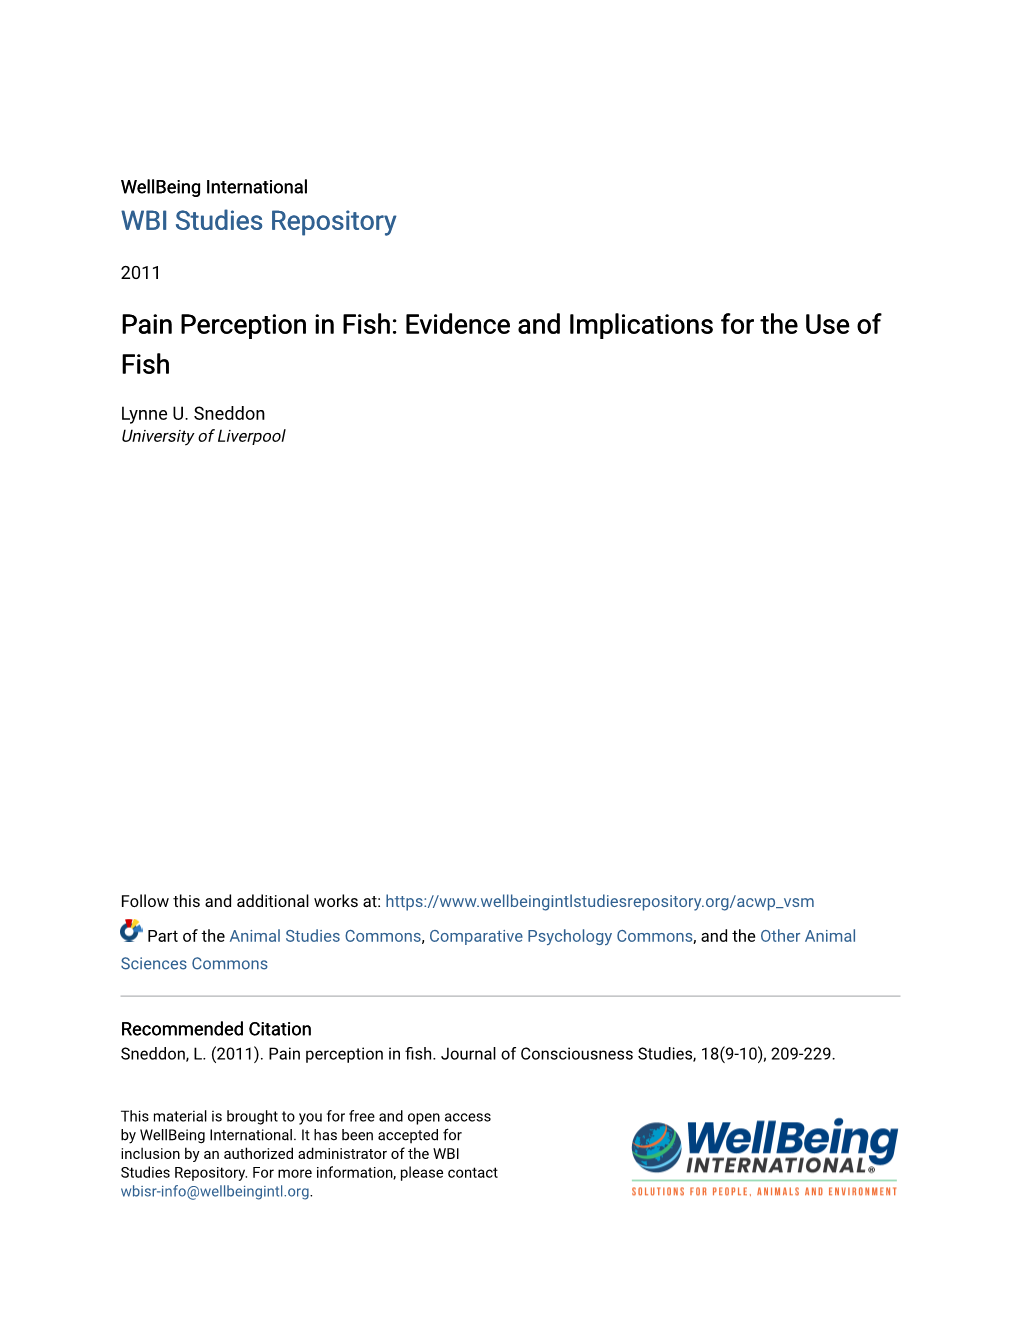 Pain Perception in Fish: Evidence and Implications for the Use of Fish